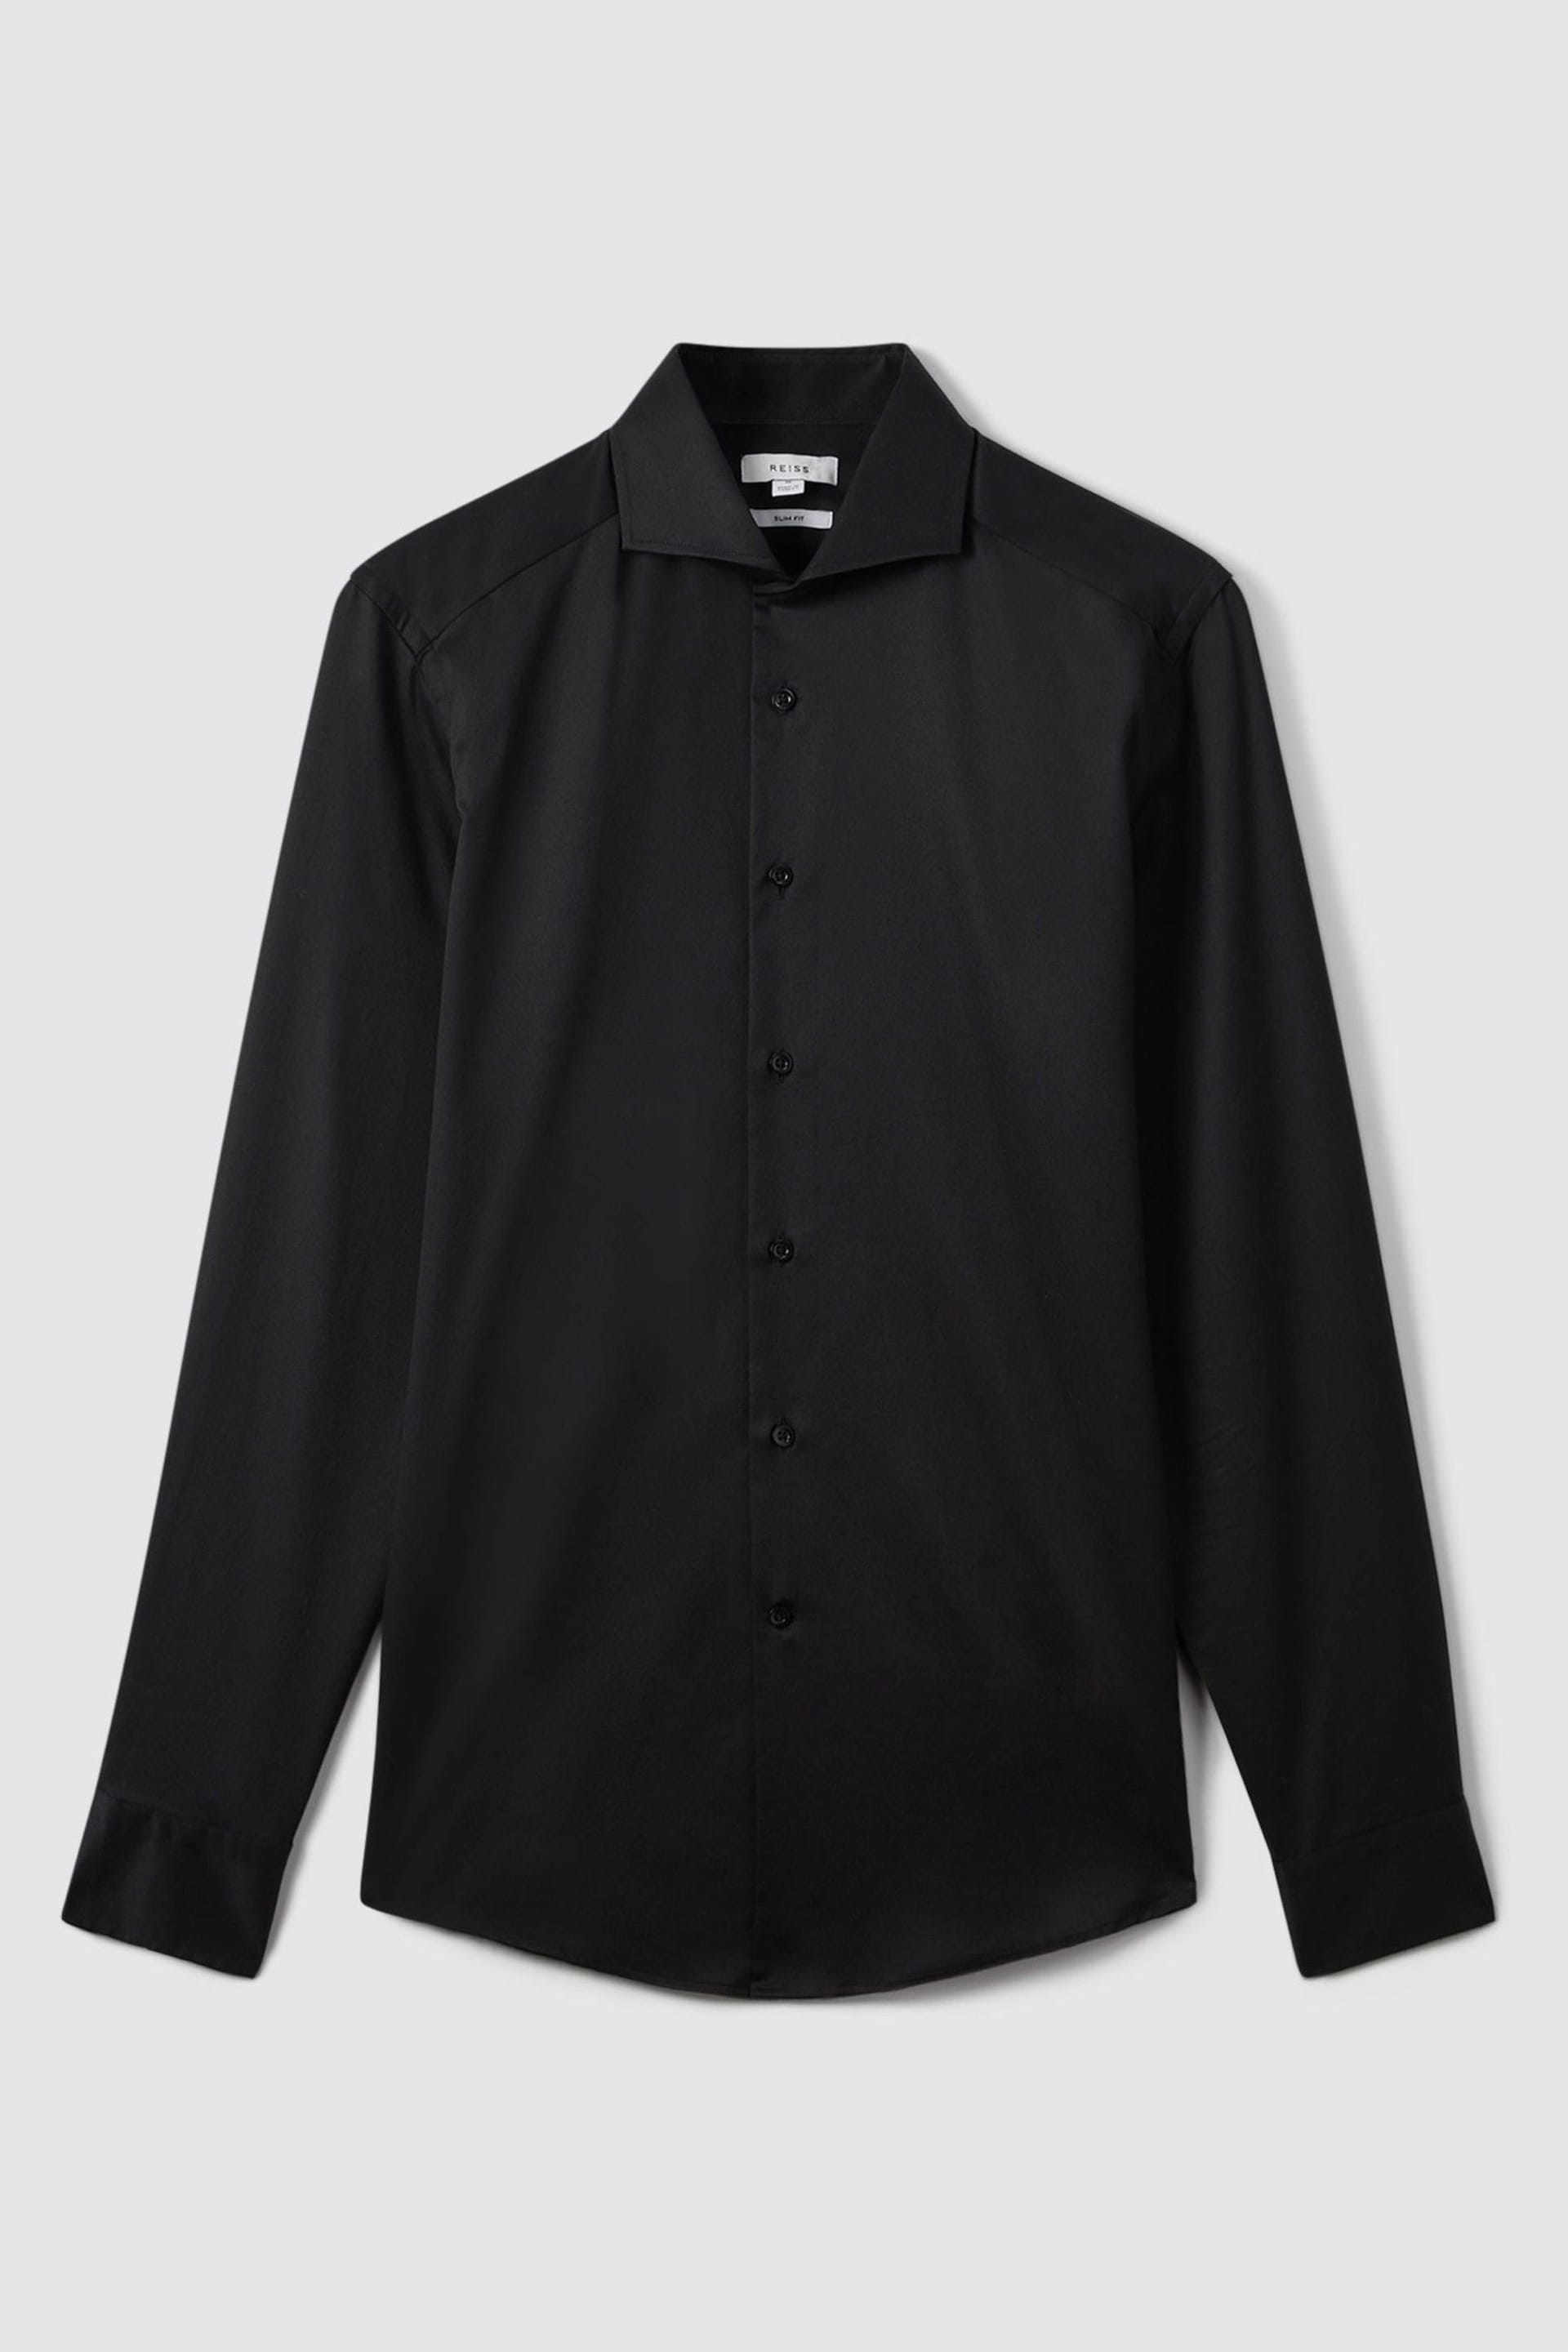 Reiss Black Storm Slim Fit Two-Fold Cotton Shirt - Image 2 of 6